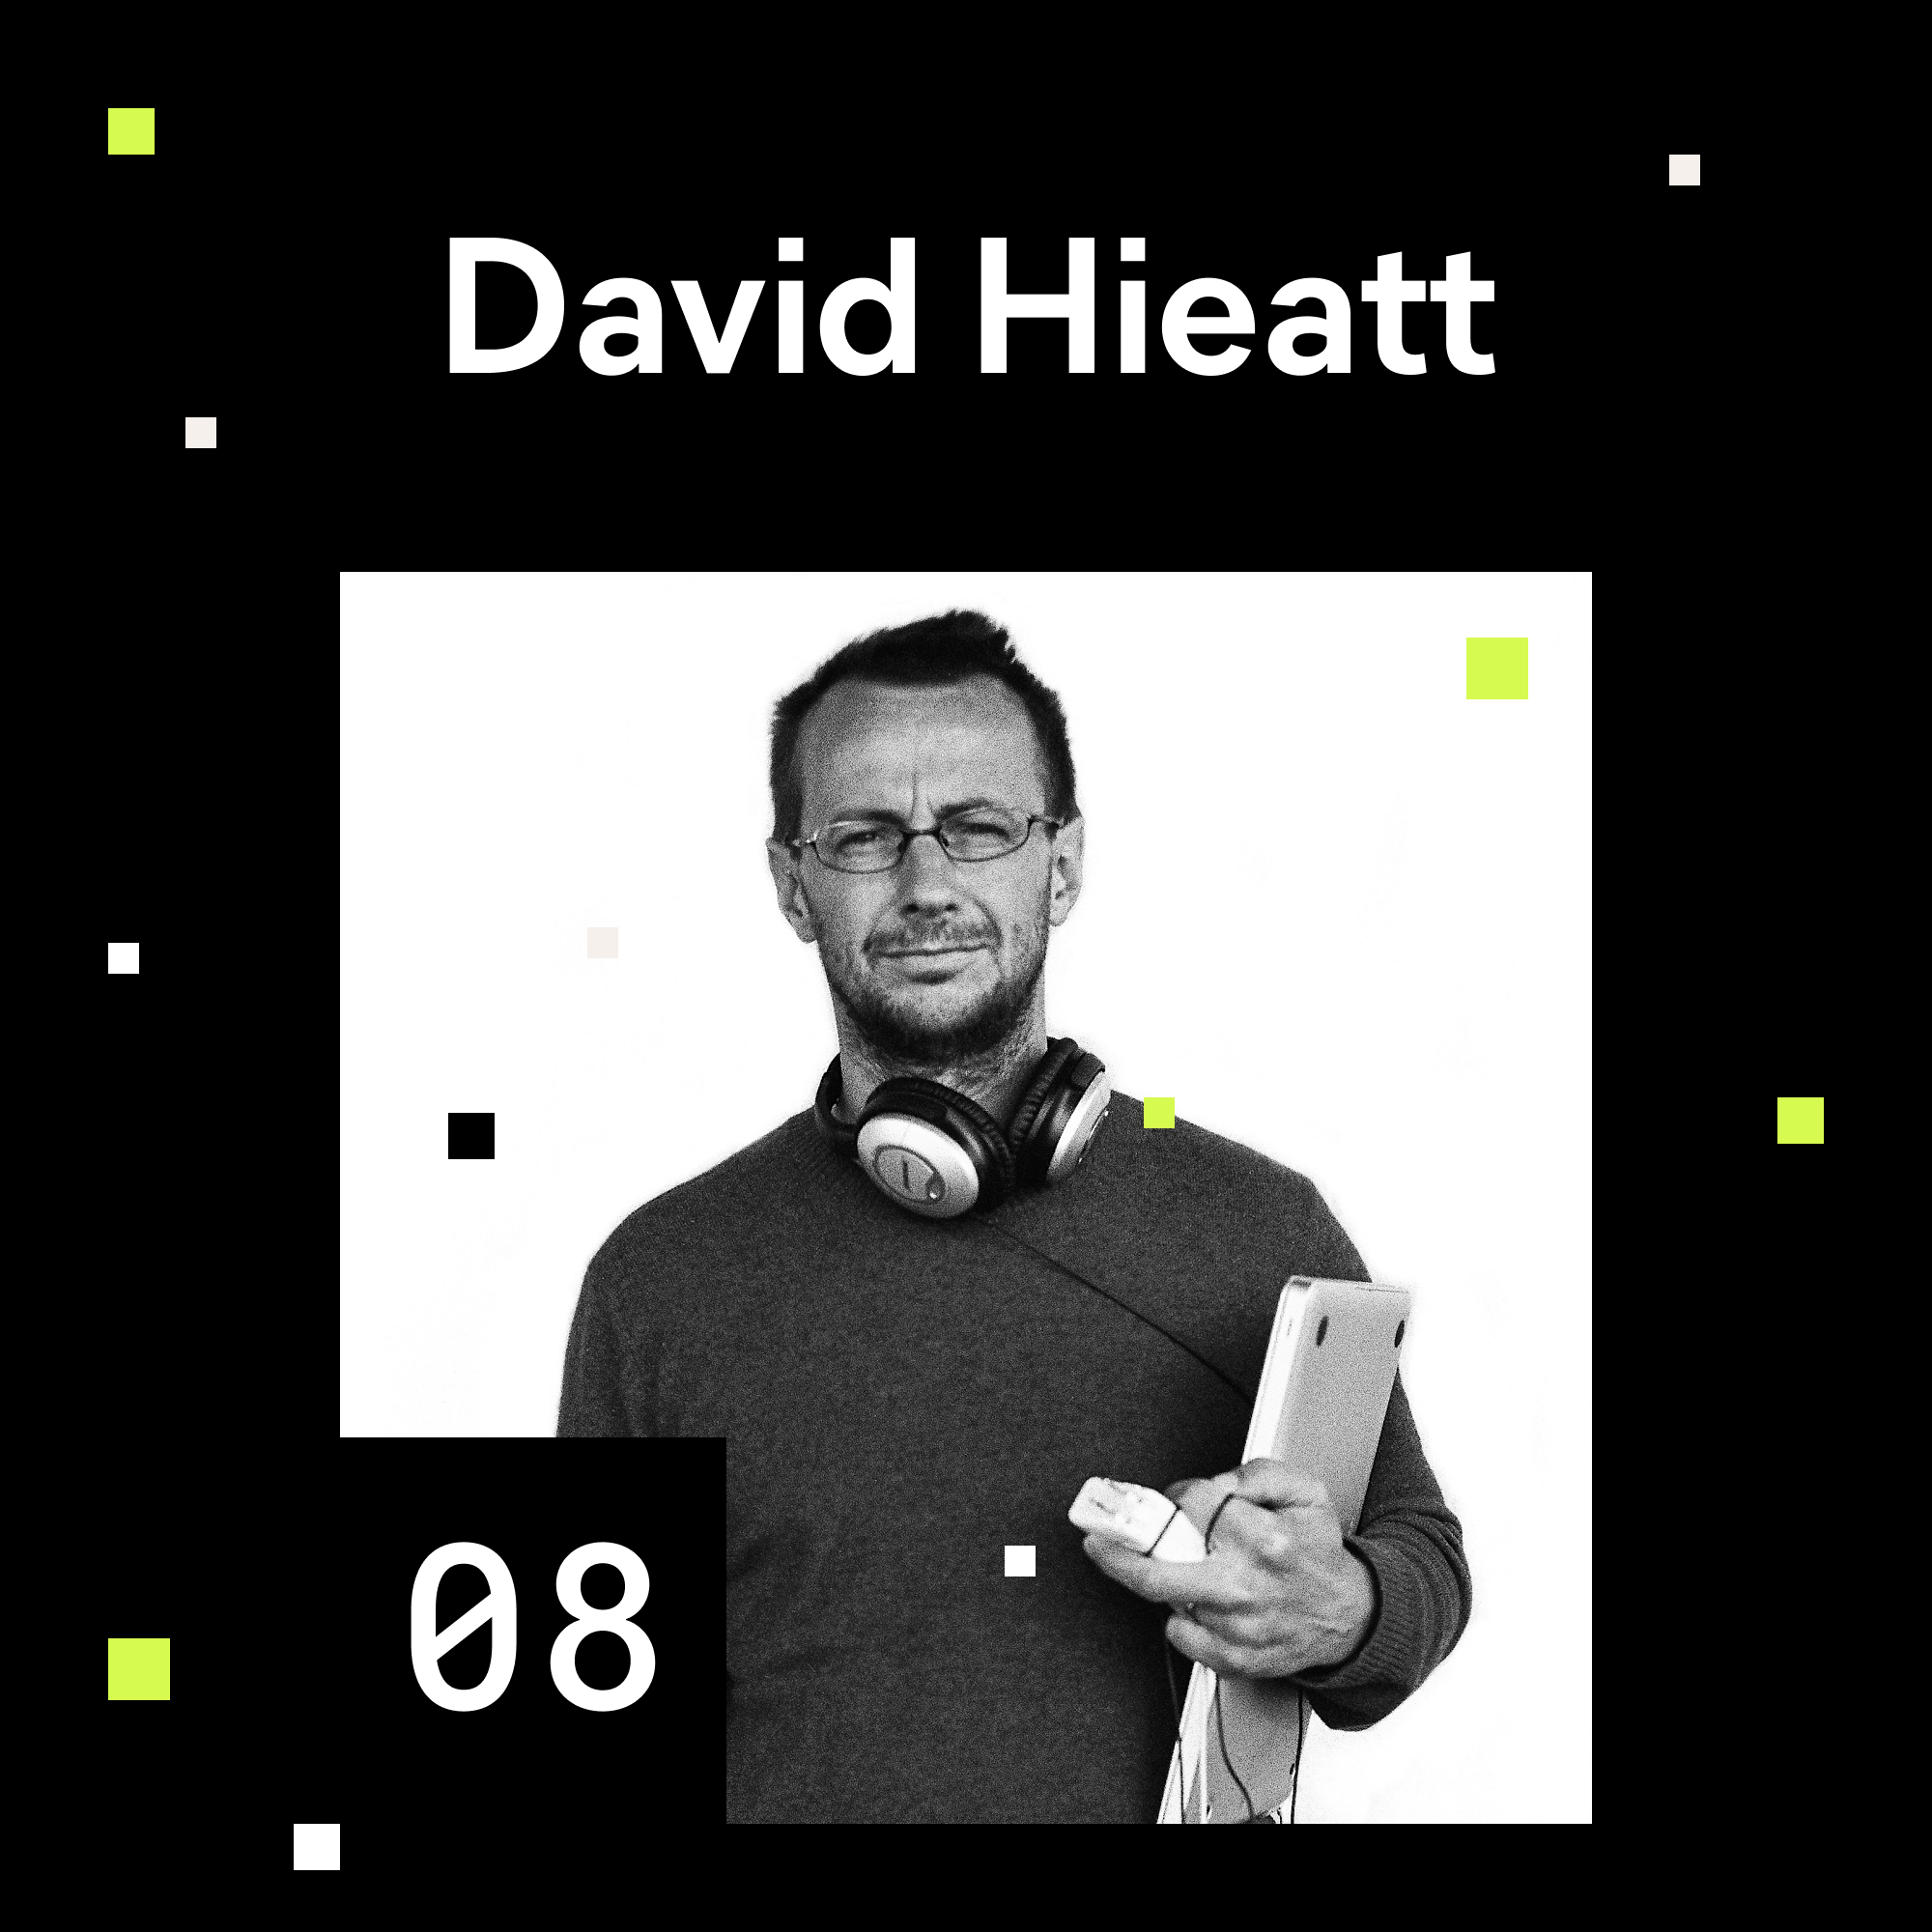 David Hieat portrait for episode 8 of the shaping chaos podcast.